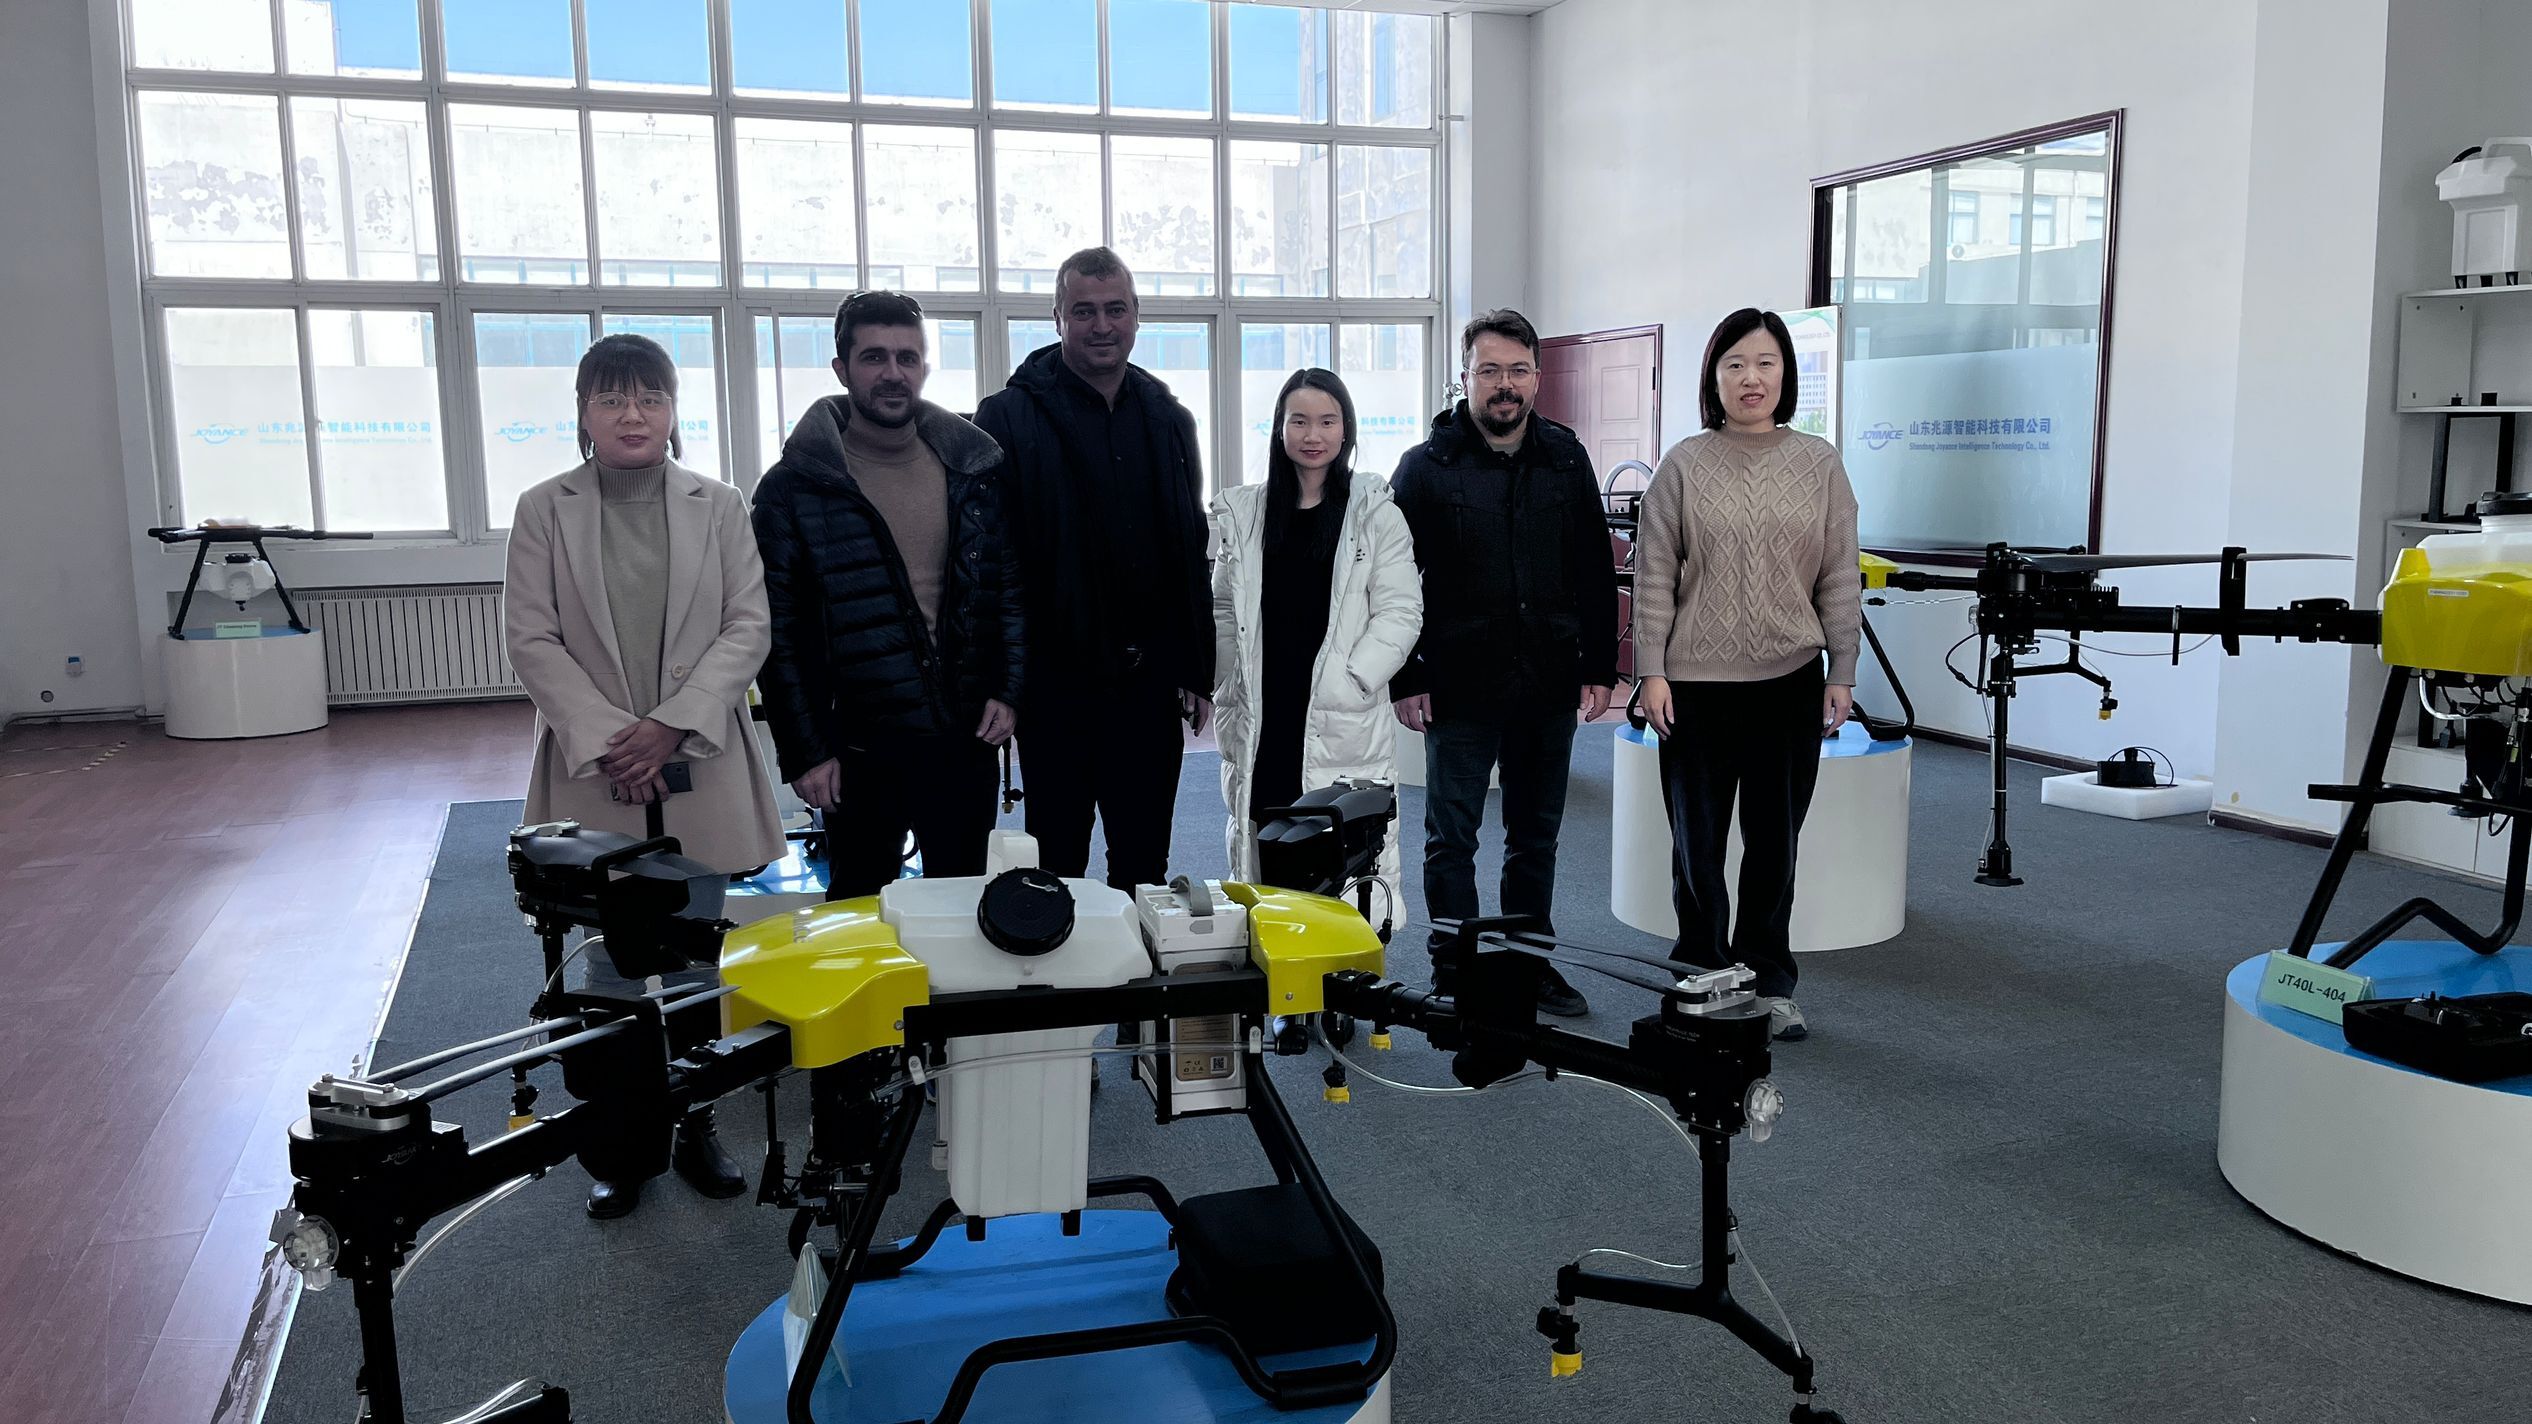 Customers from Turkey visited the JOYANCE agricultural drone exhibition